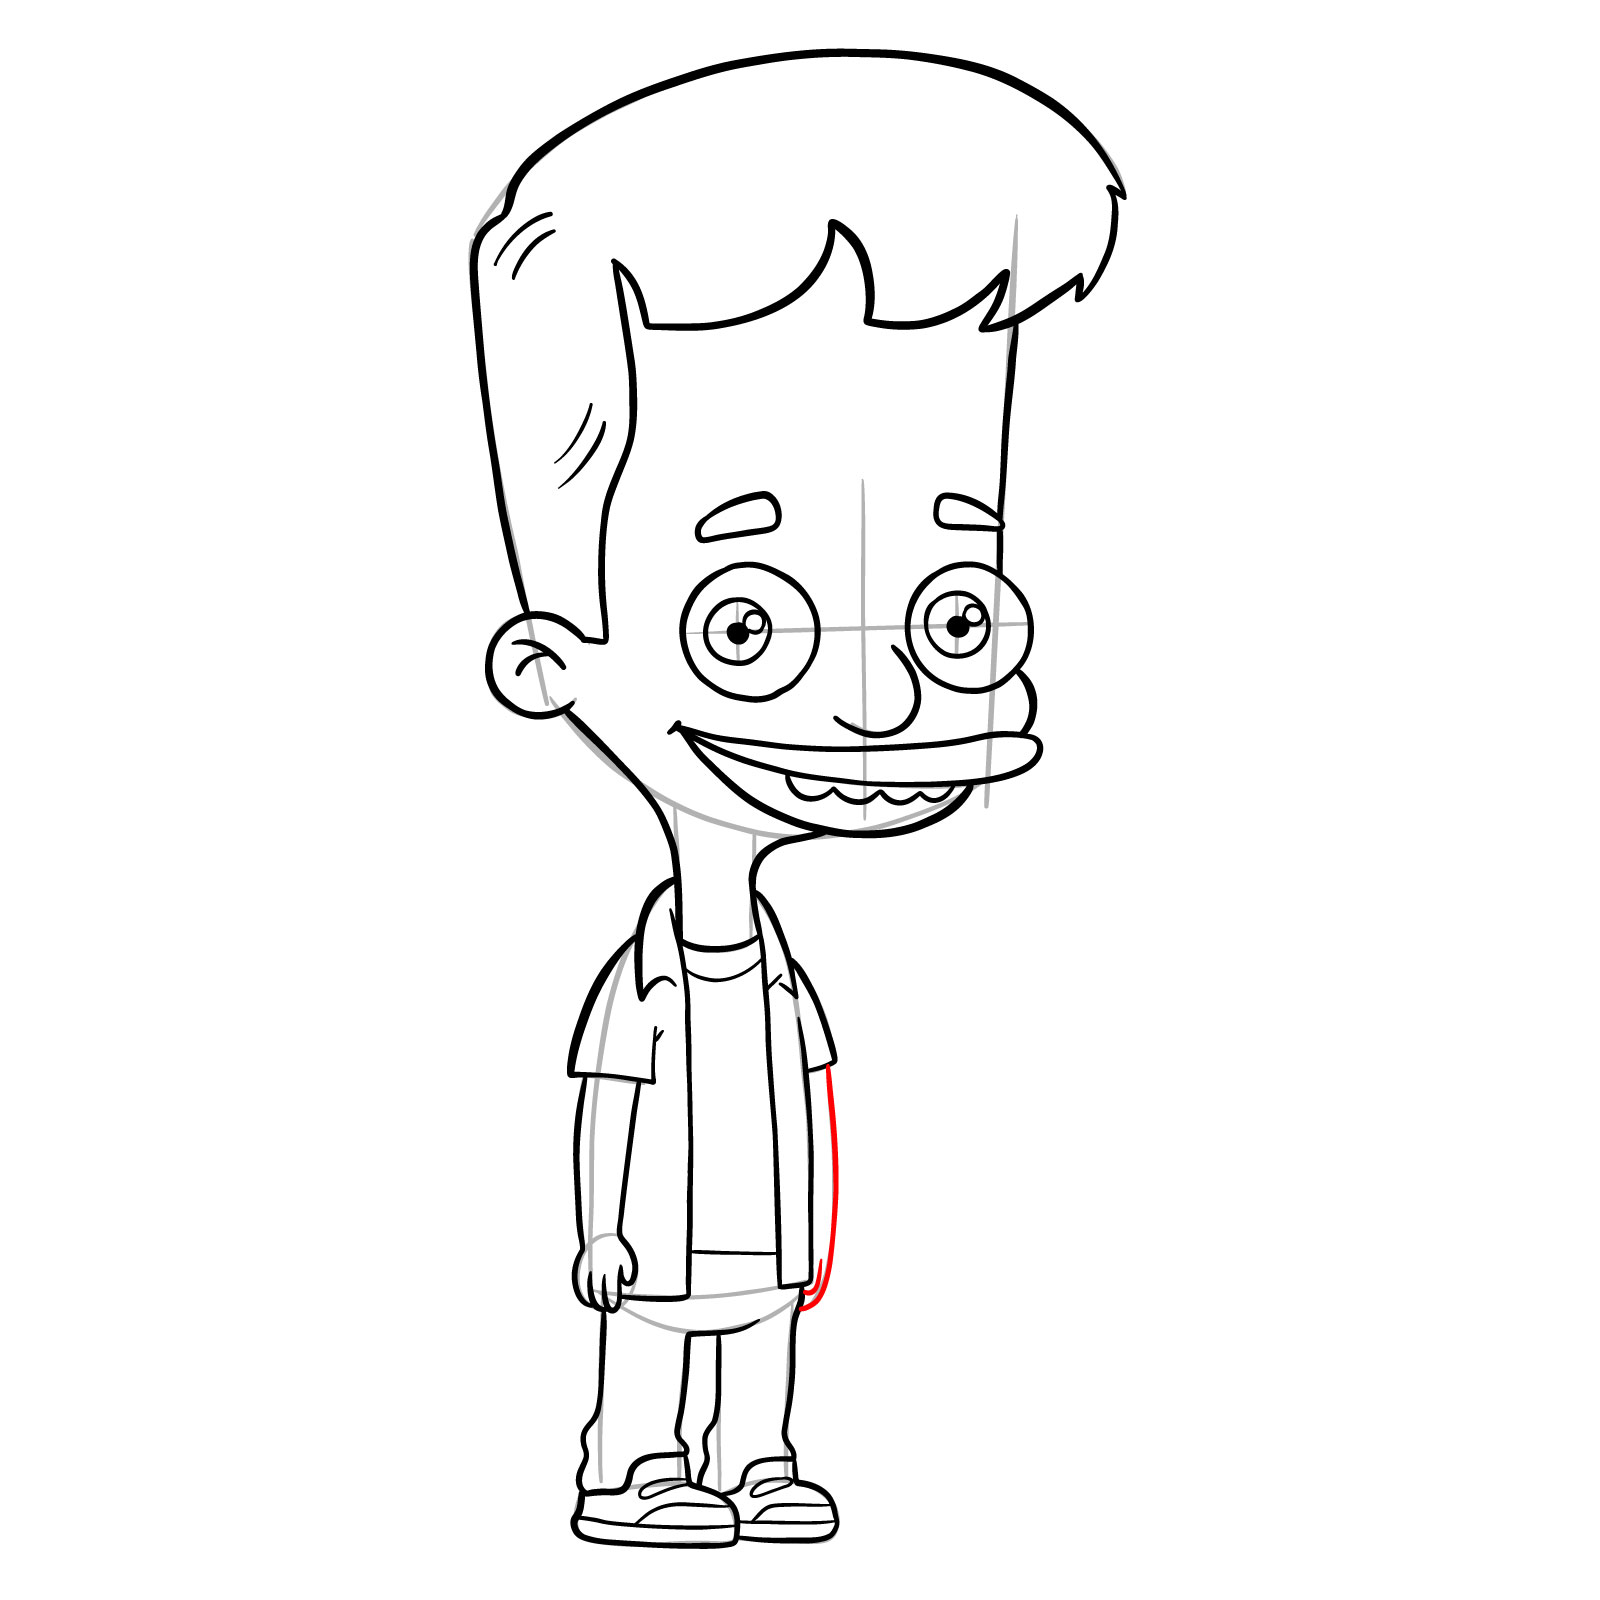 How to draw Nick Birch from Big Mouth - step 25